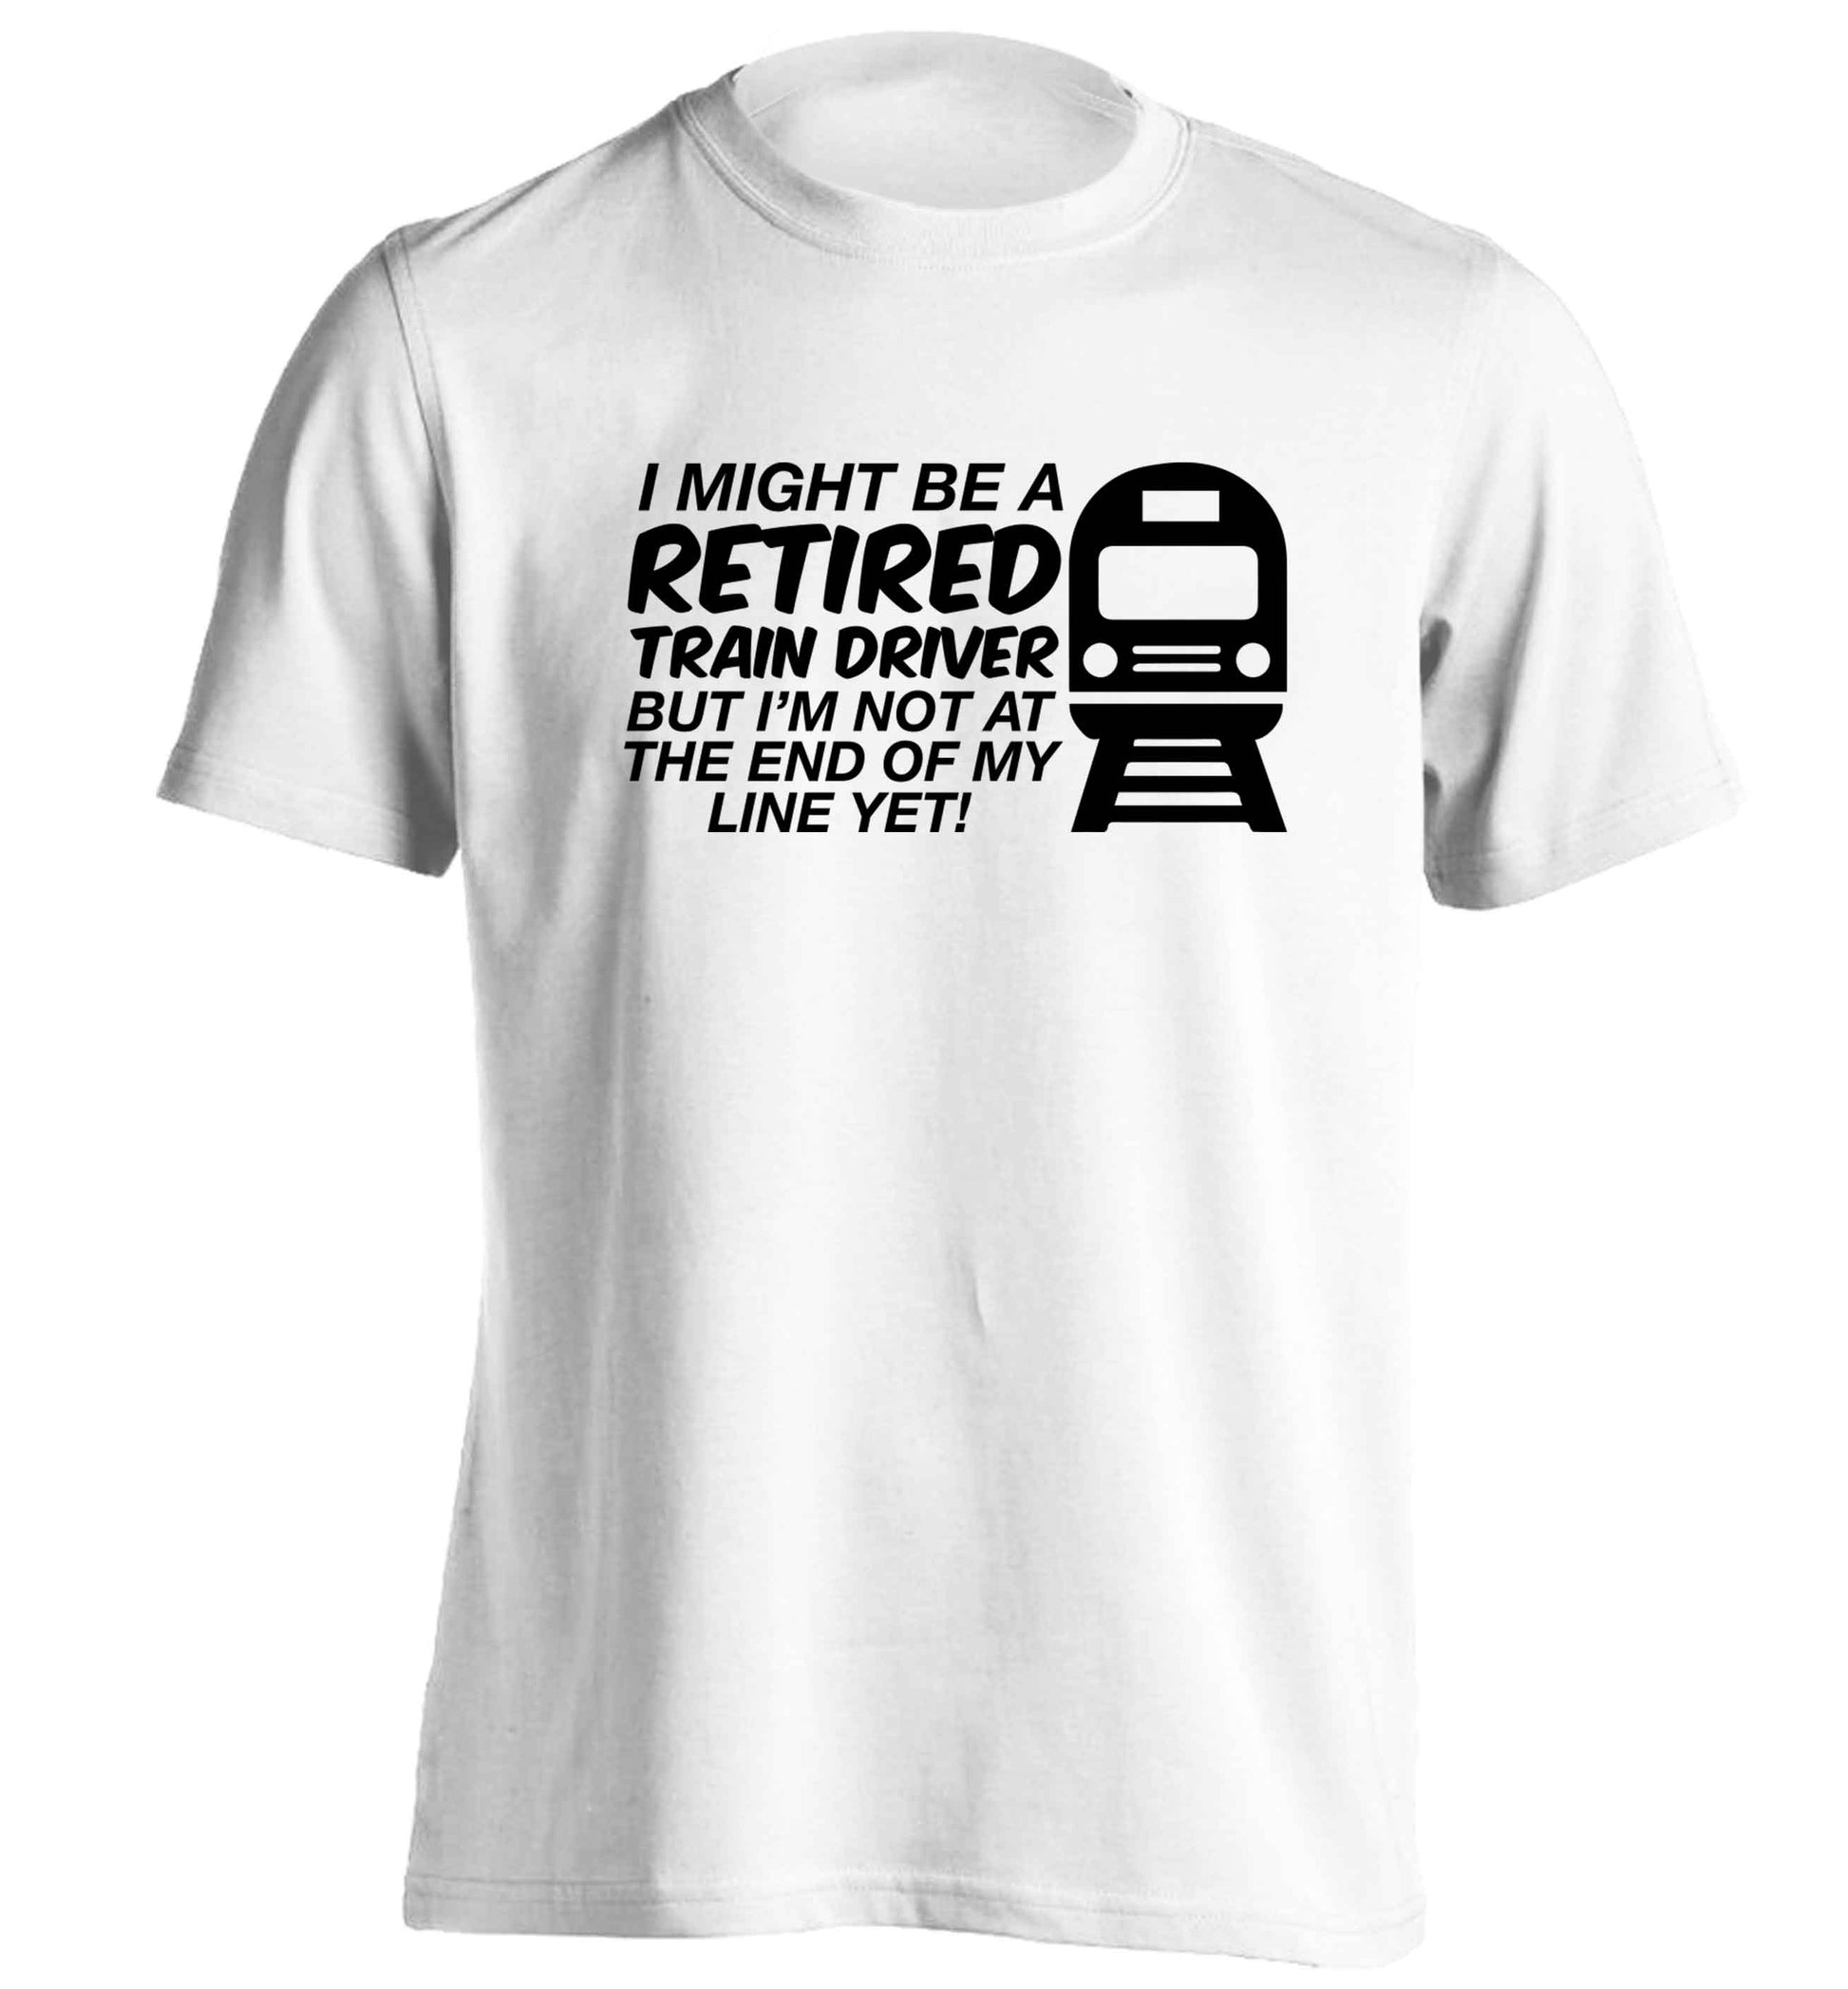 Retired train driver but I'm not at the end of my line yet adults unisex white Tshirt 2XL